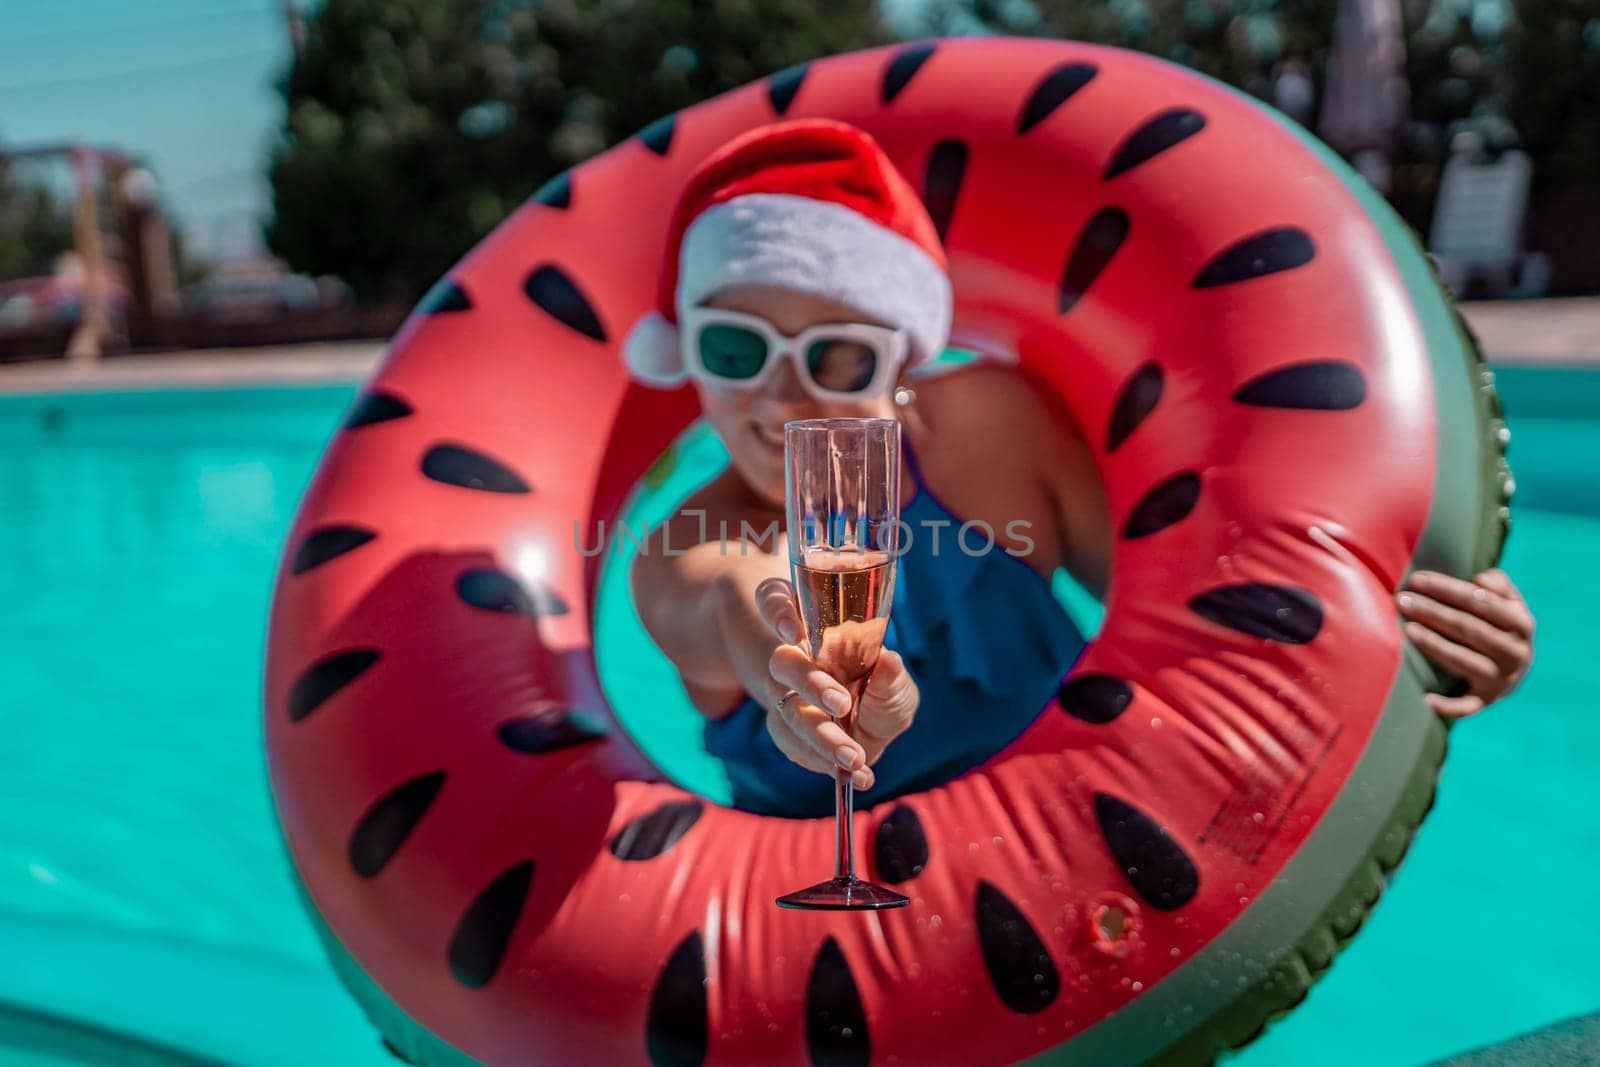 Woman pool Santa hat. A happy woman in a blue bikini, a red and white Santa hat and sunglasses poses near the pool with a glass of champagne standing nearby. Christmas holidays concept